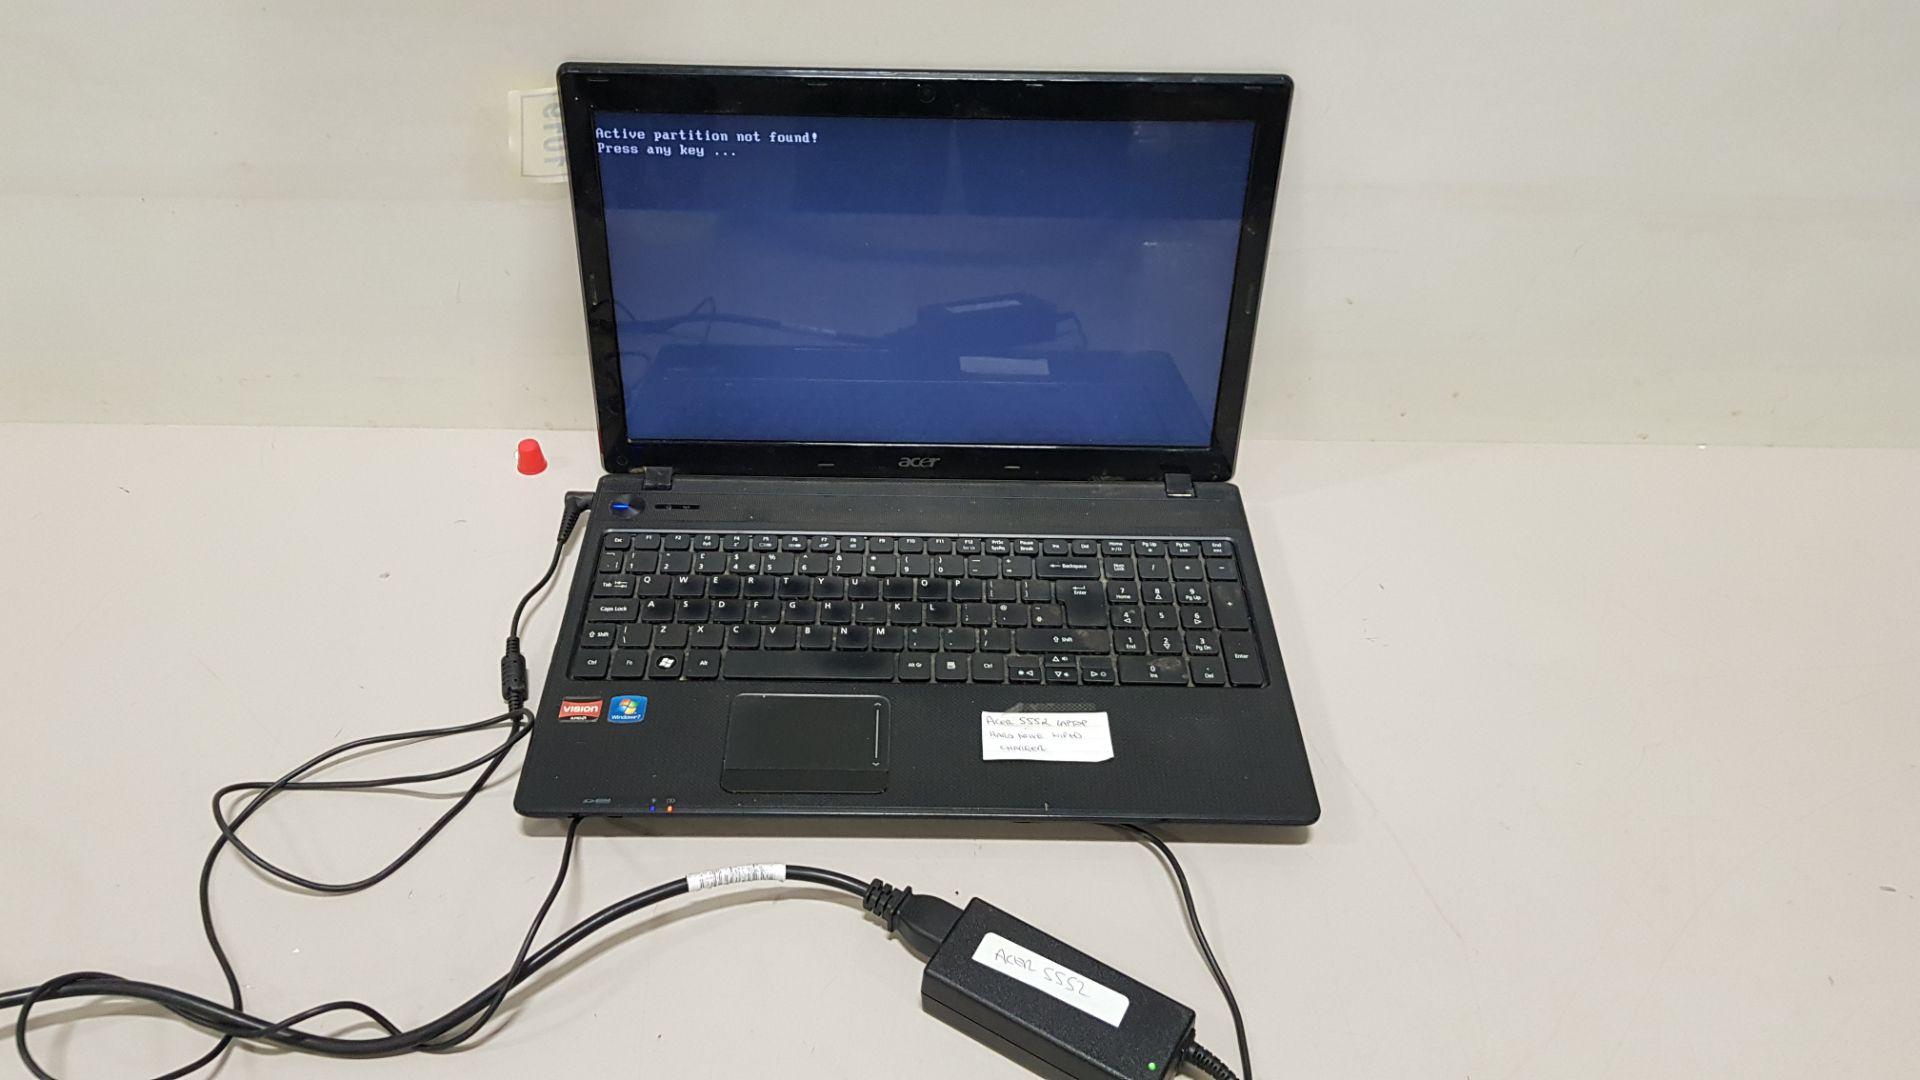 ACER 5552 LAPTOP - HARD DRIVE WIPED - NO OS - COMES WITH CHARGER